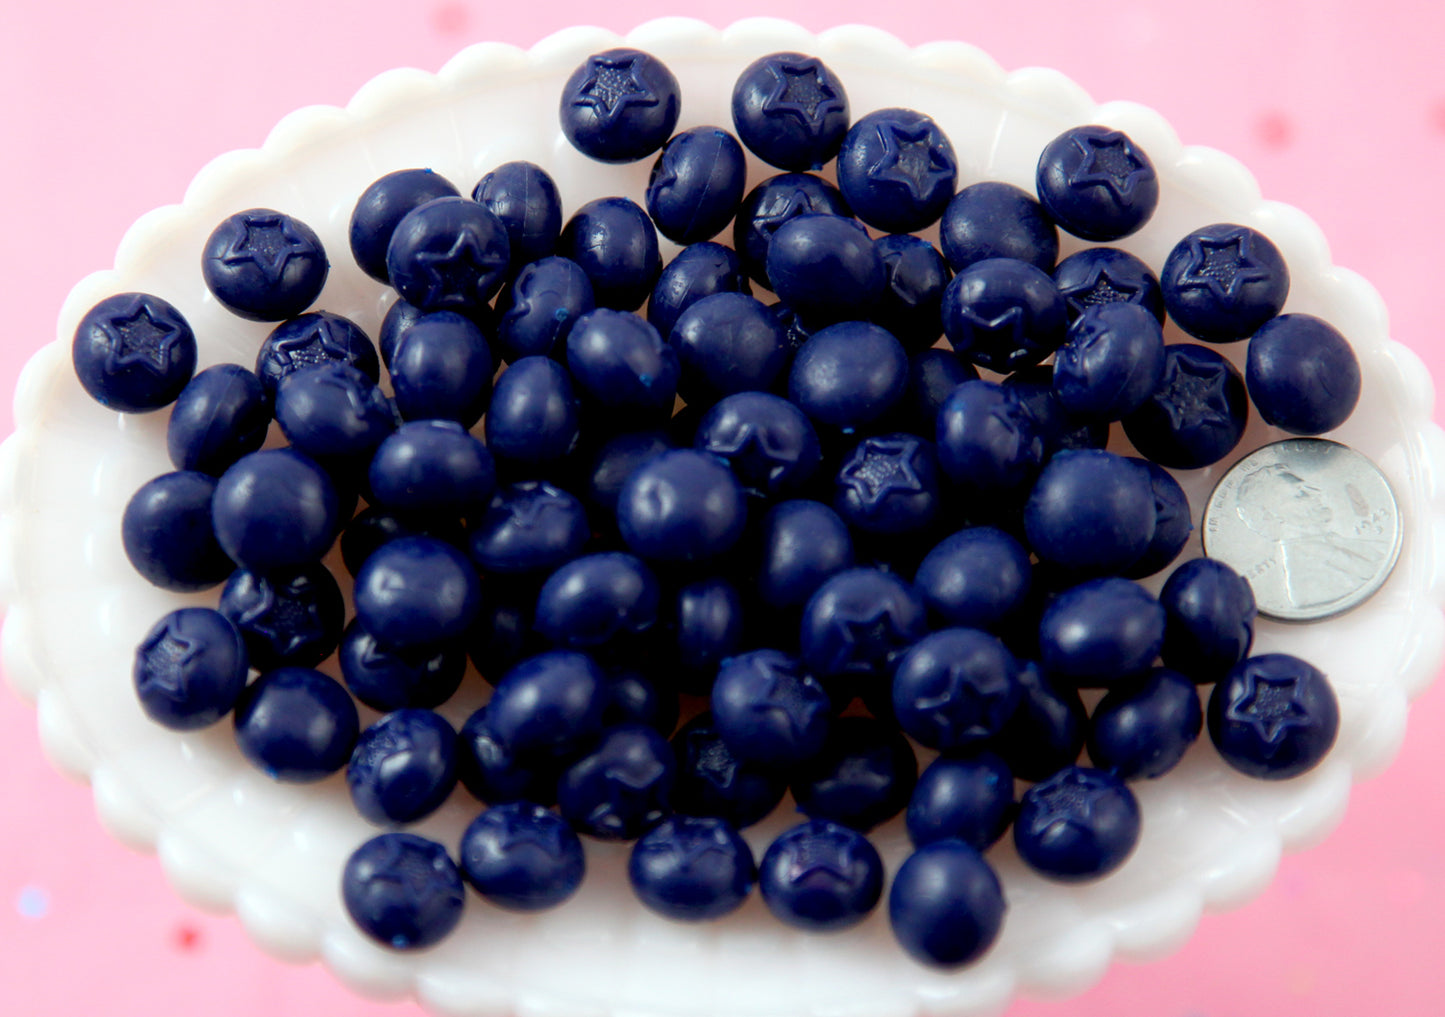 Fake Blueberries - 12mm Little Blueberries Soft Squishy Silicone Berry - 10 pc set